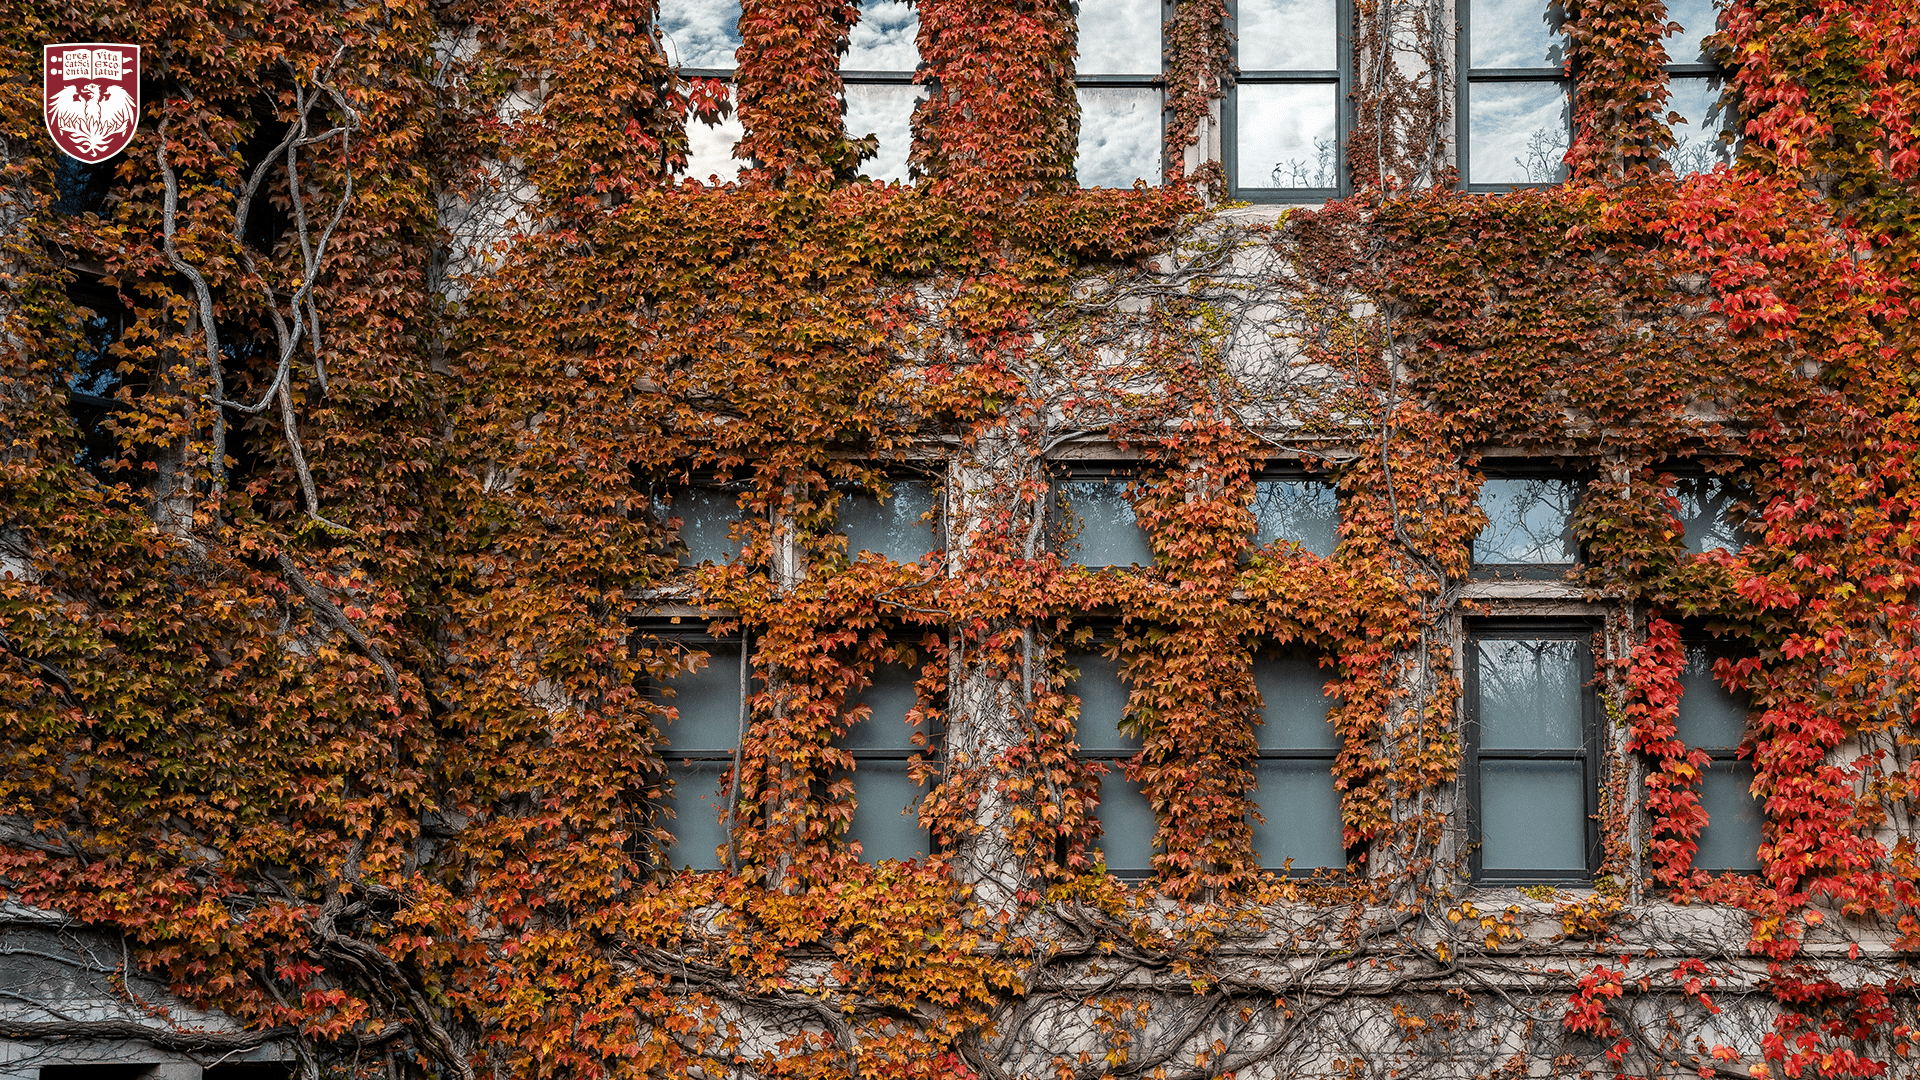 Building exterior windows surrounded by red ivy